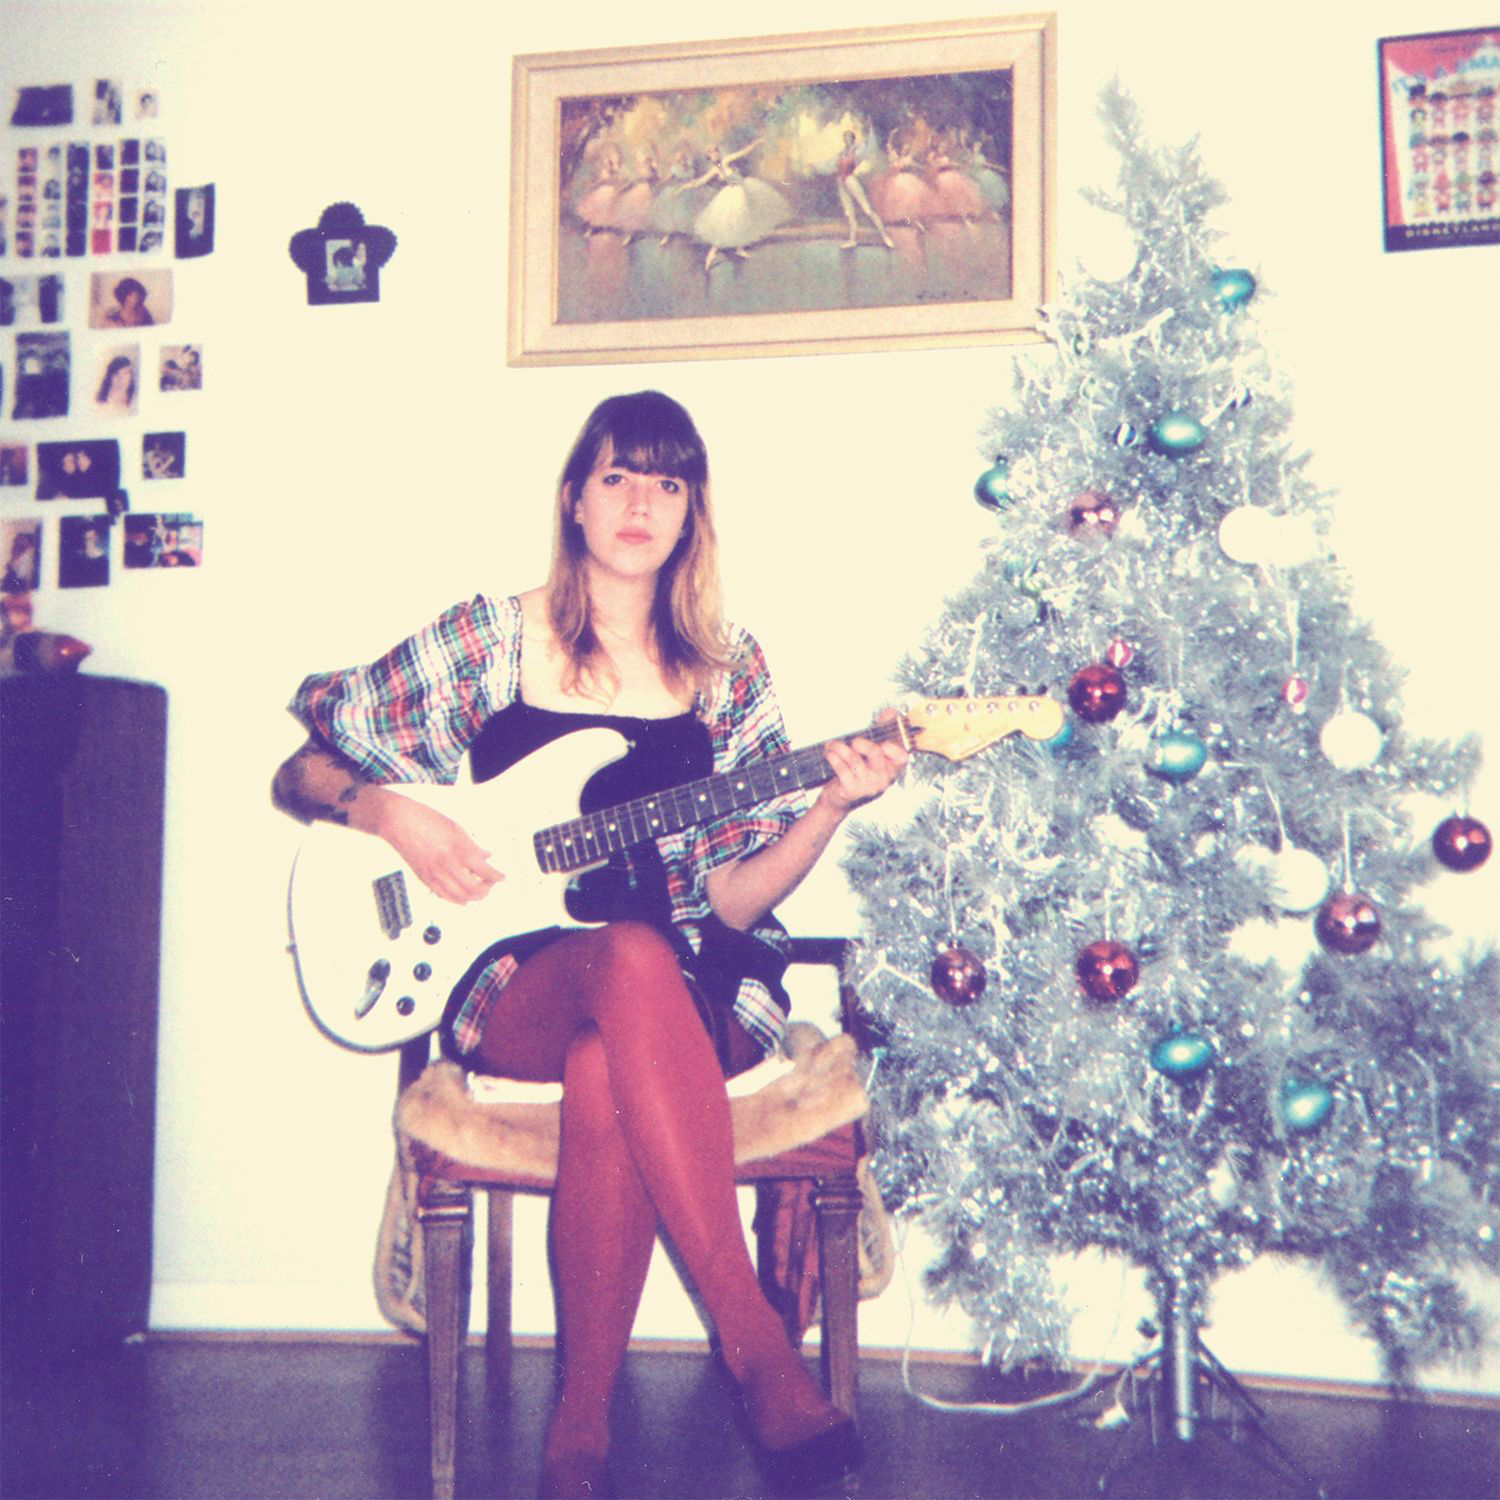 Review of 'Christmas in Reno', by Cassie Ramone. Out via Burger Records on December 11th